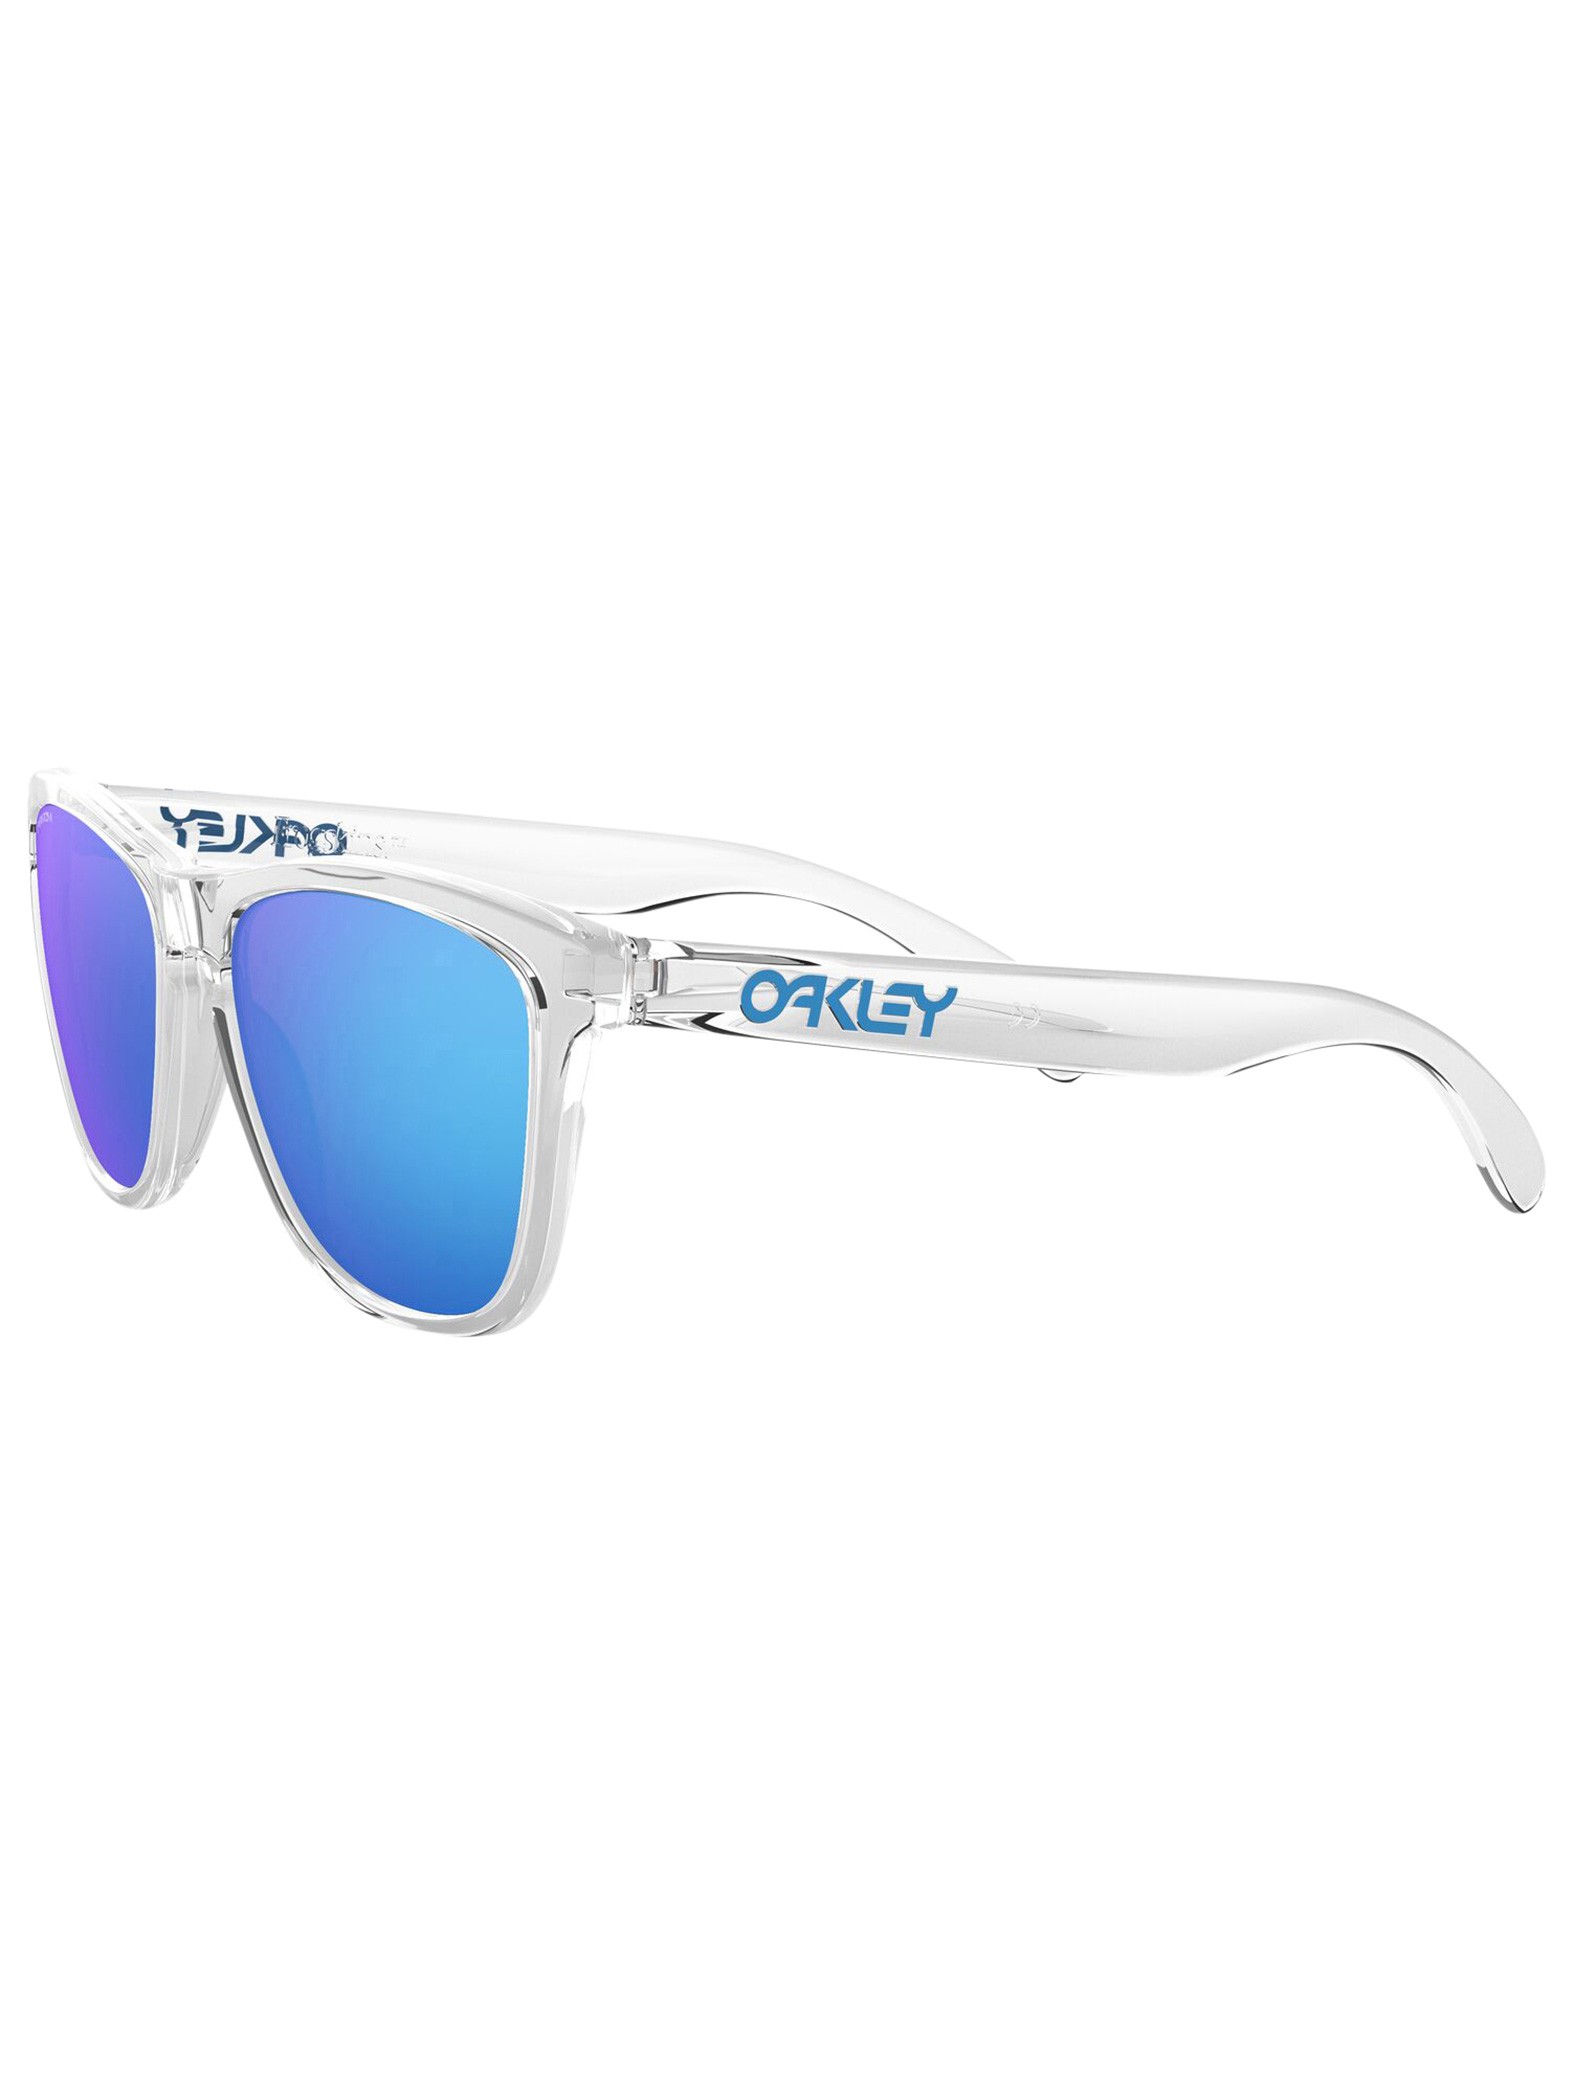 Oakley Frogskins Prizm Sapphire Square Unisex Sunglasses OO9013 9013D0 55 - image 3 of 3